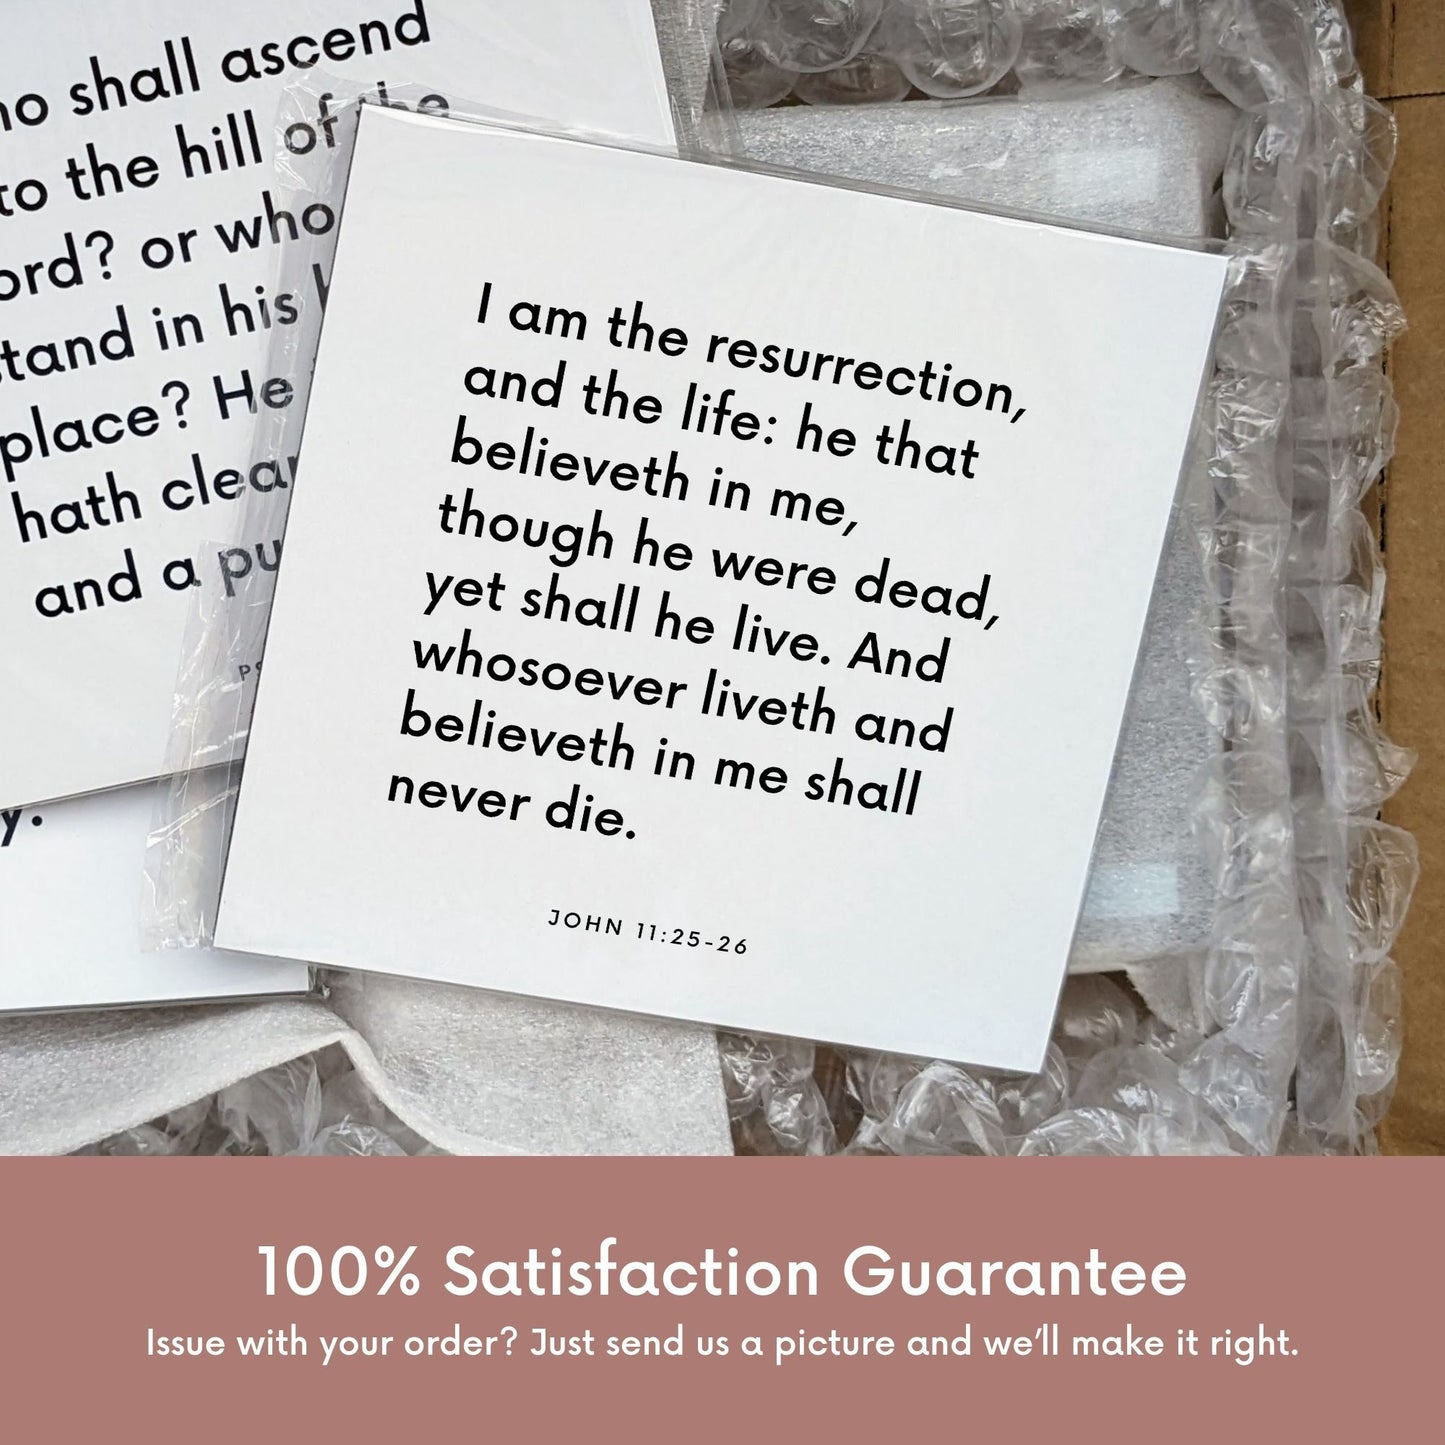 Shipping materials for scripture tile of John 11:25-26 - "I am the resurrection, and the life"